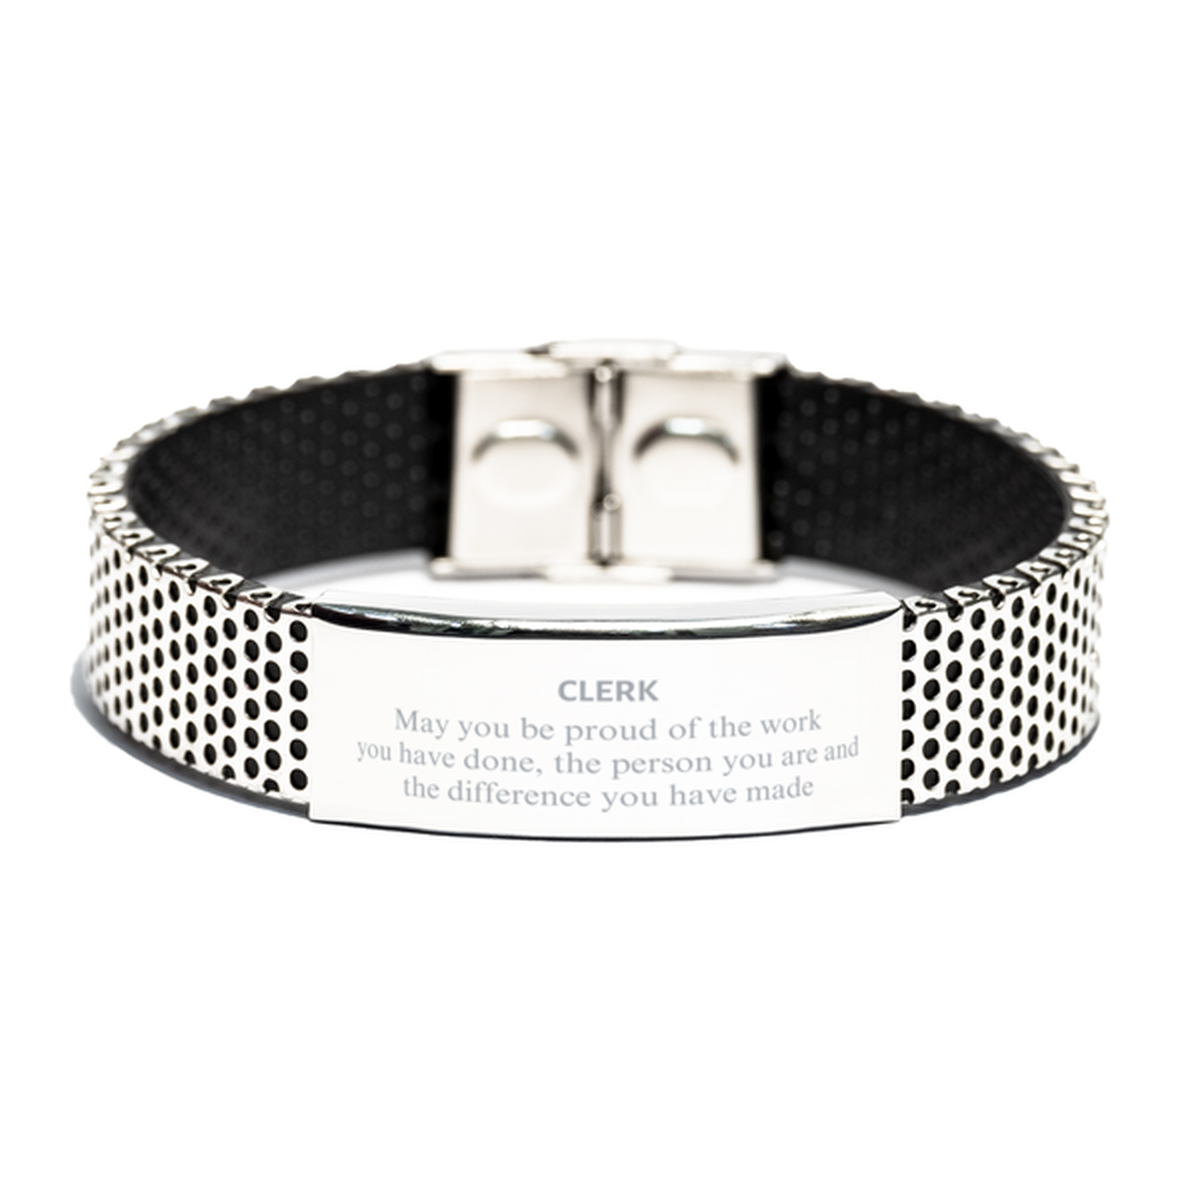 Clerk May you be proud of the work you have done, Retirement Clerk Stainless Steel Bracelet for Colleague Appreciation Gifts Amazing for Clerk